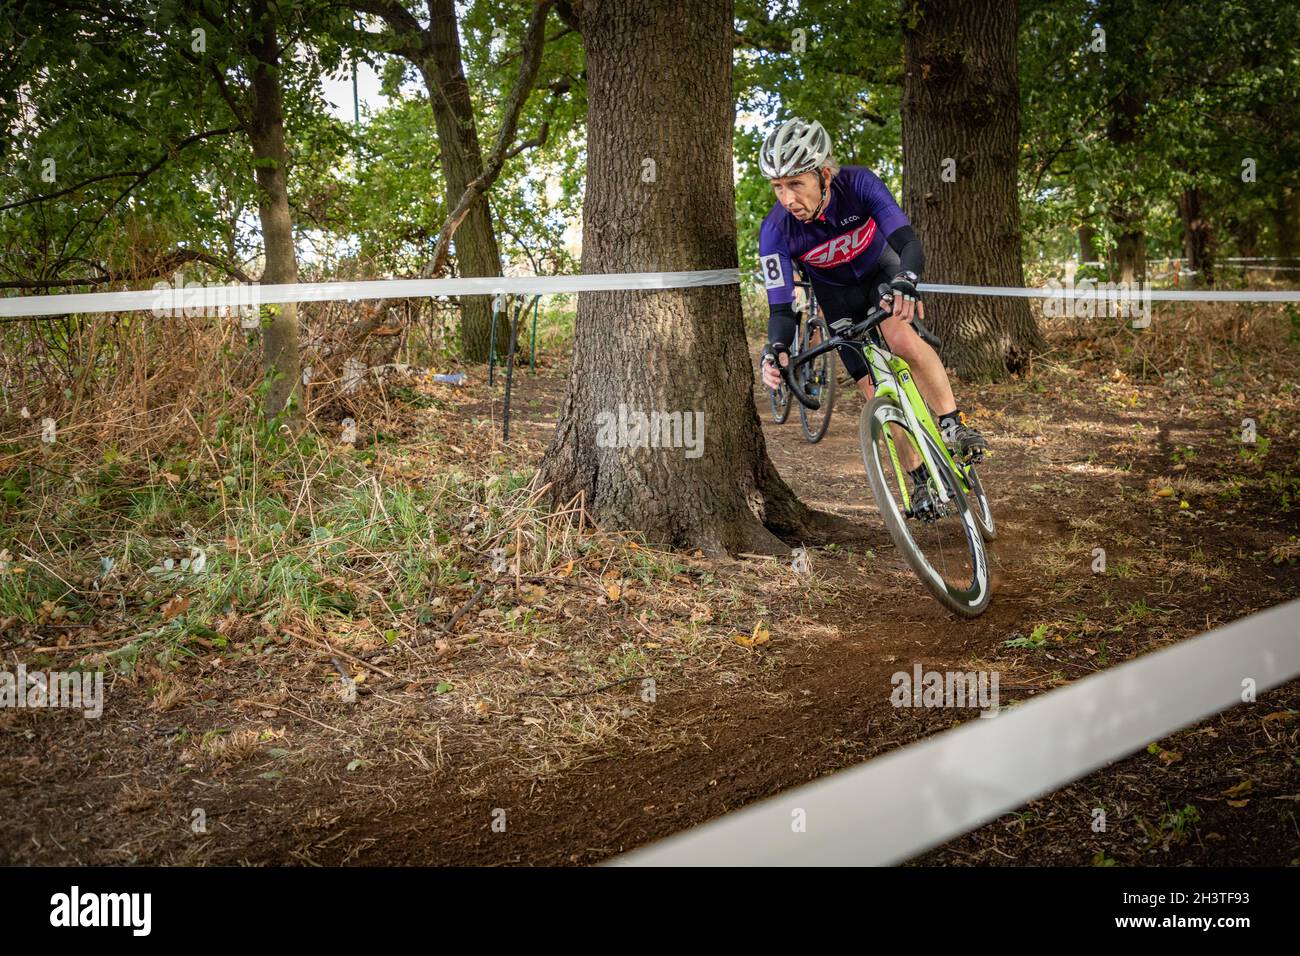 Cyclocross race event, Middlesbrough, Cleveland, England, UK, GB, Europe. Stock Photo